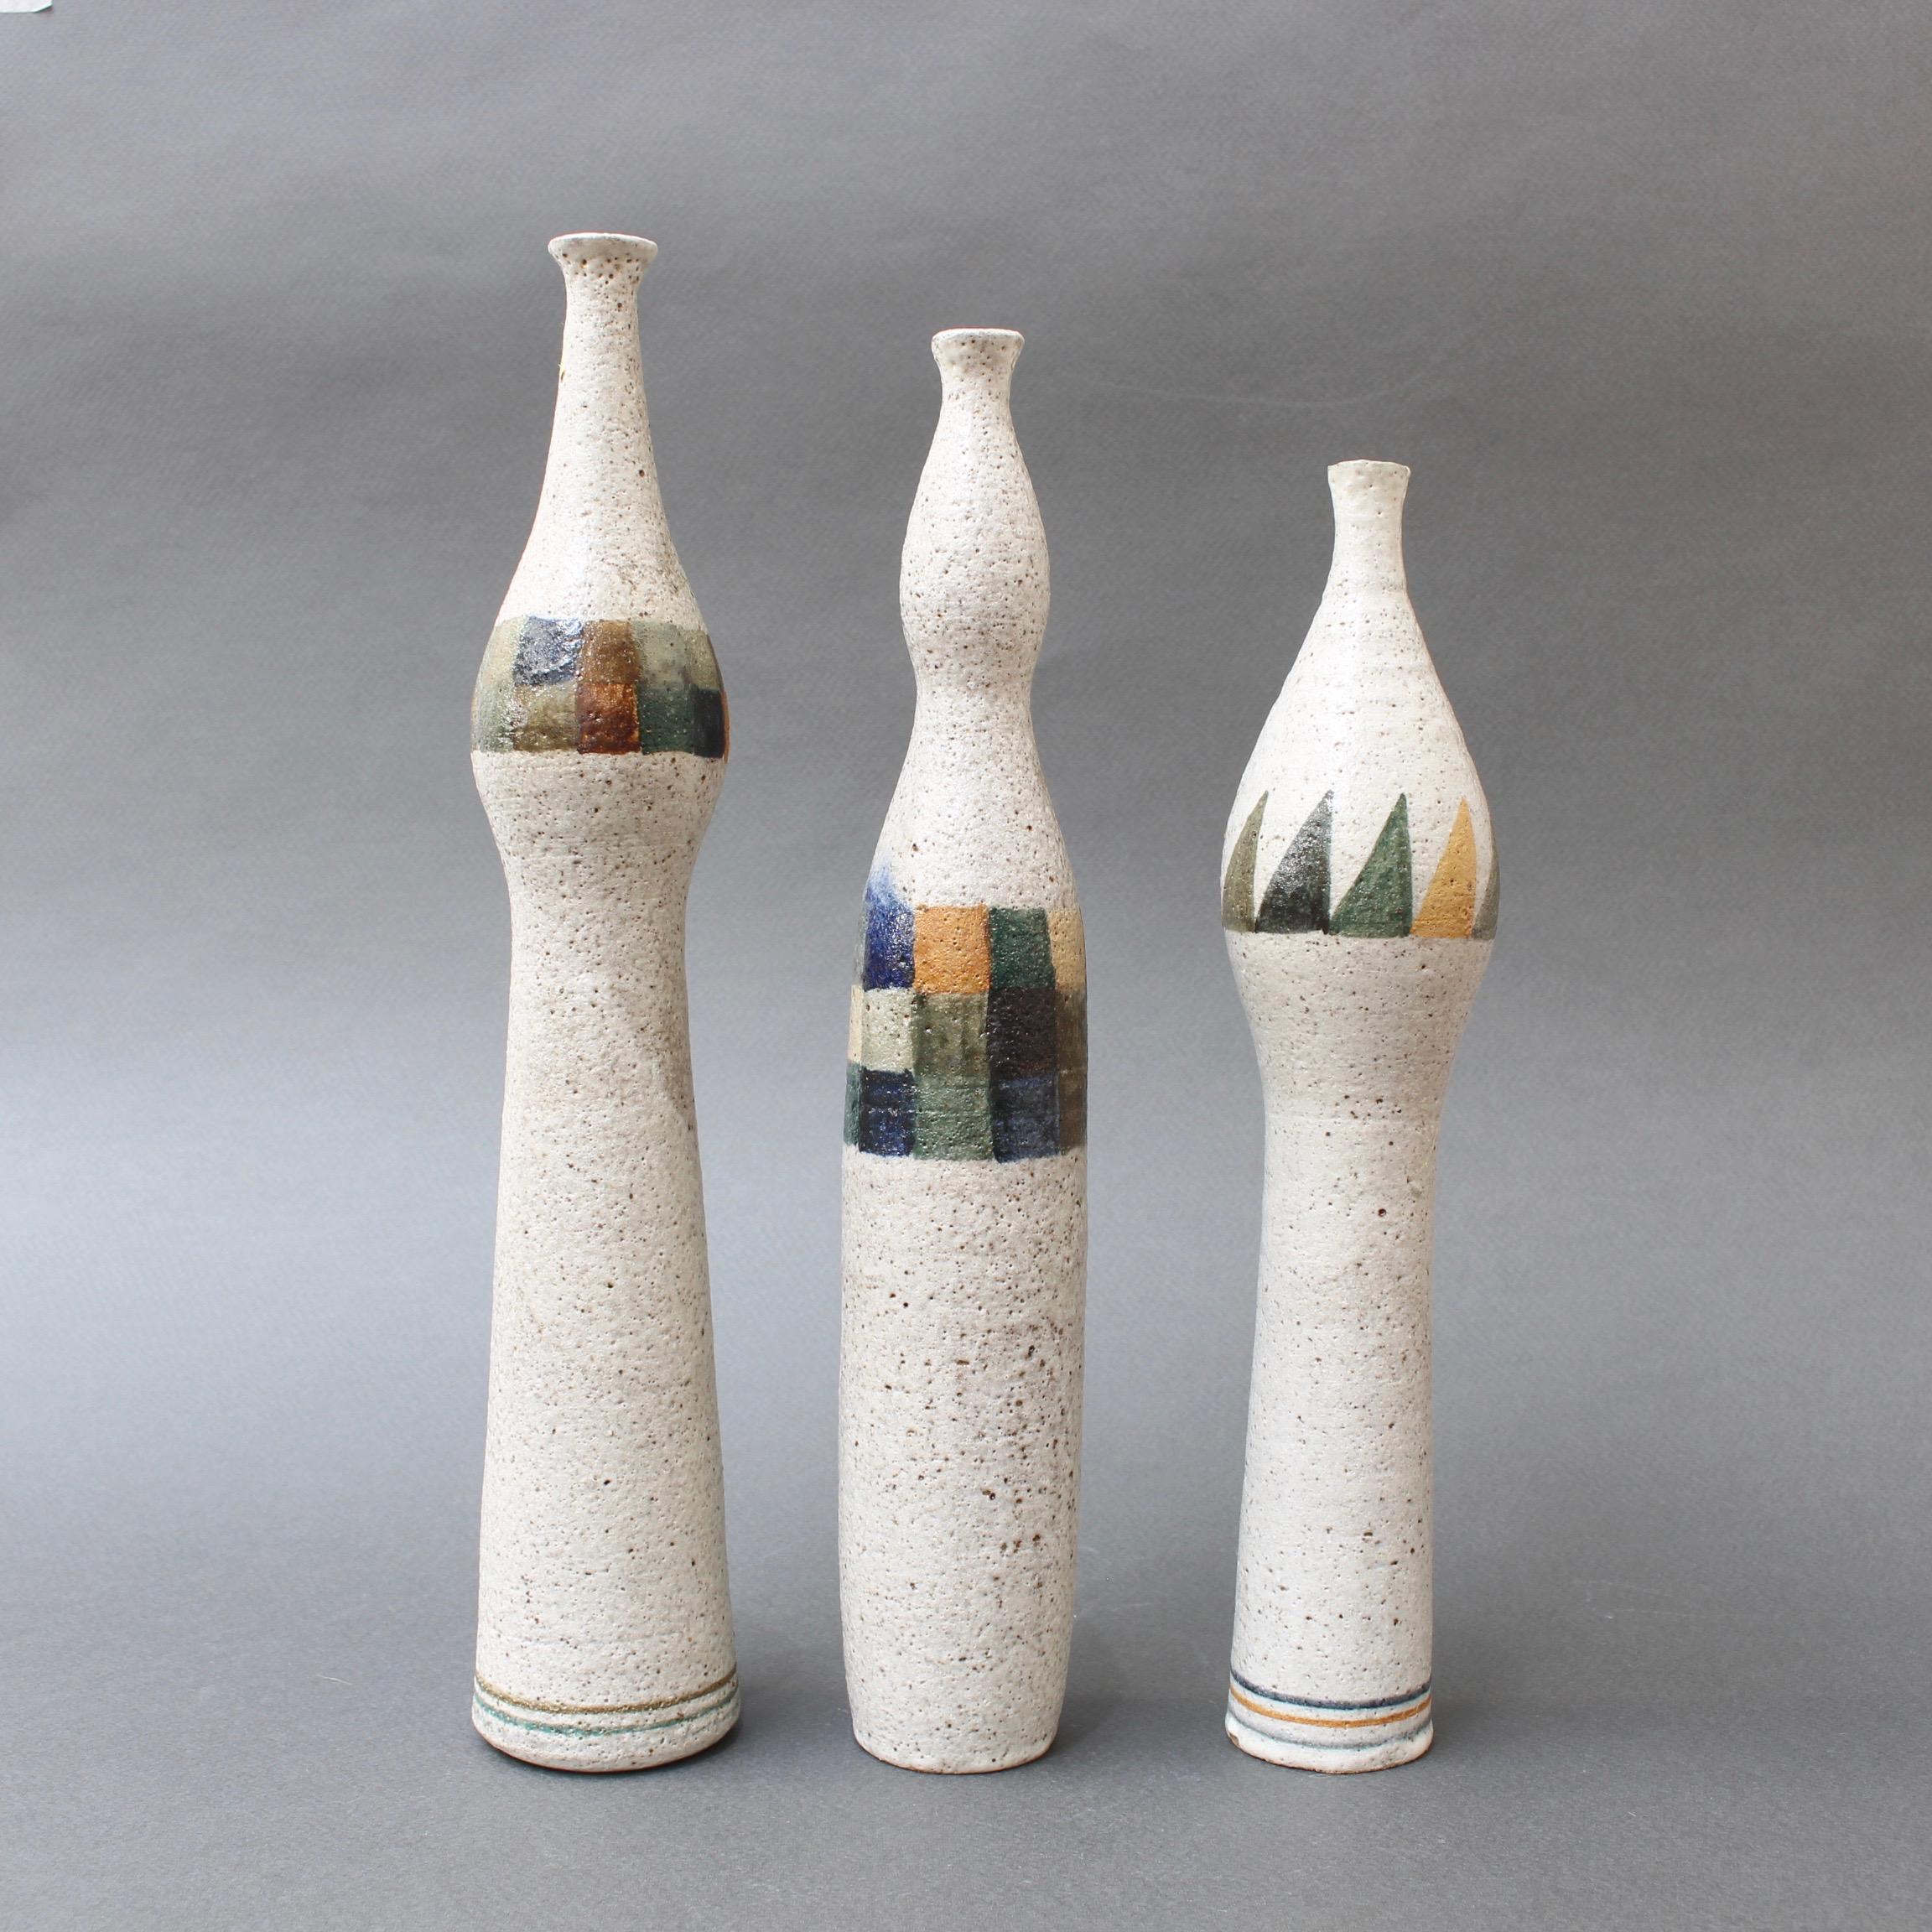 Minimalist Set of Three Bottle-Shaped Vases by Bruno Gambone, circa 1990s For Sale